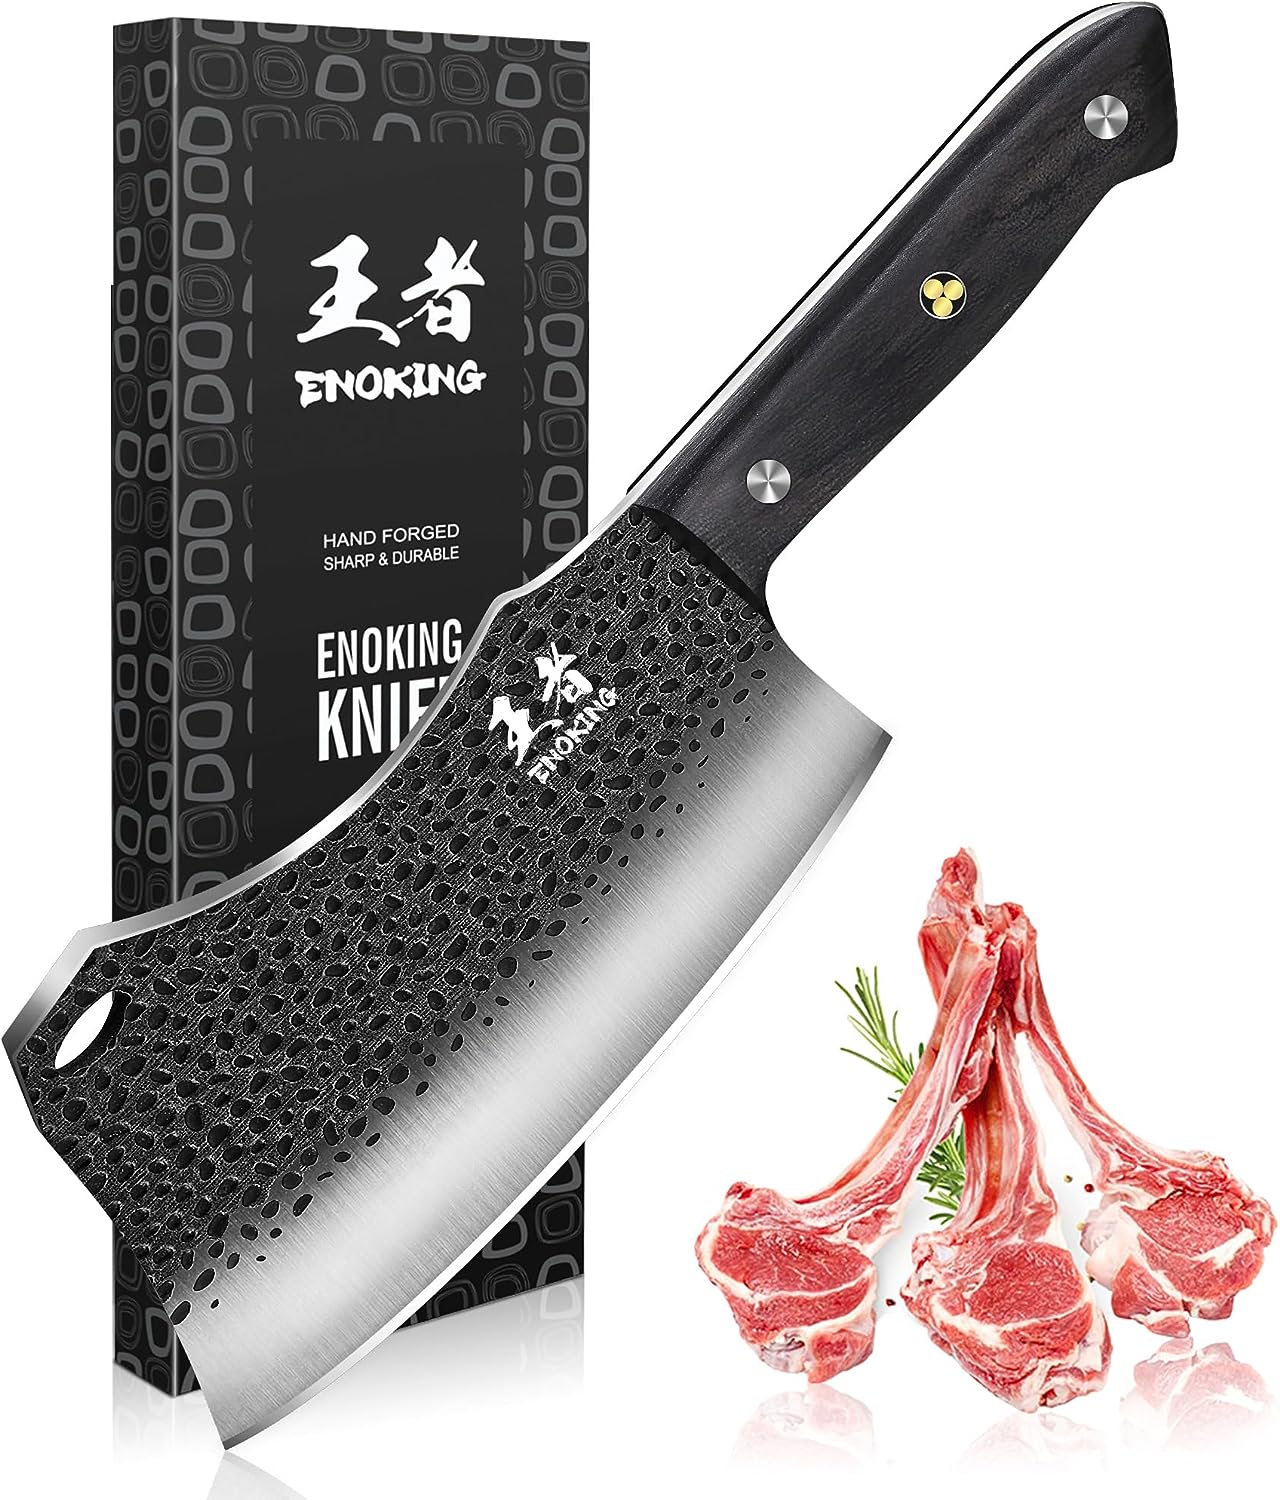 ENOKING Cleaver Knife & Heavy Duty Bone Chopper Knife, Hand Forged Meat Cleaver German High Carbon Stainless Steel Butcher Knife for Home Kitchen & Outdoor (7.1-inch Meat Cleaver)